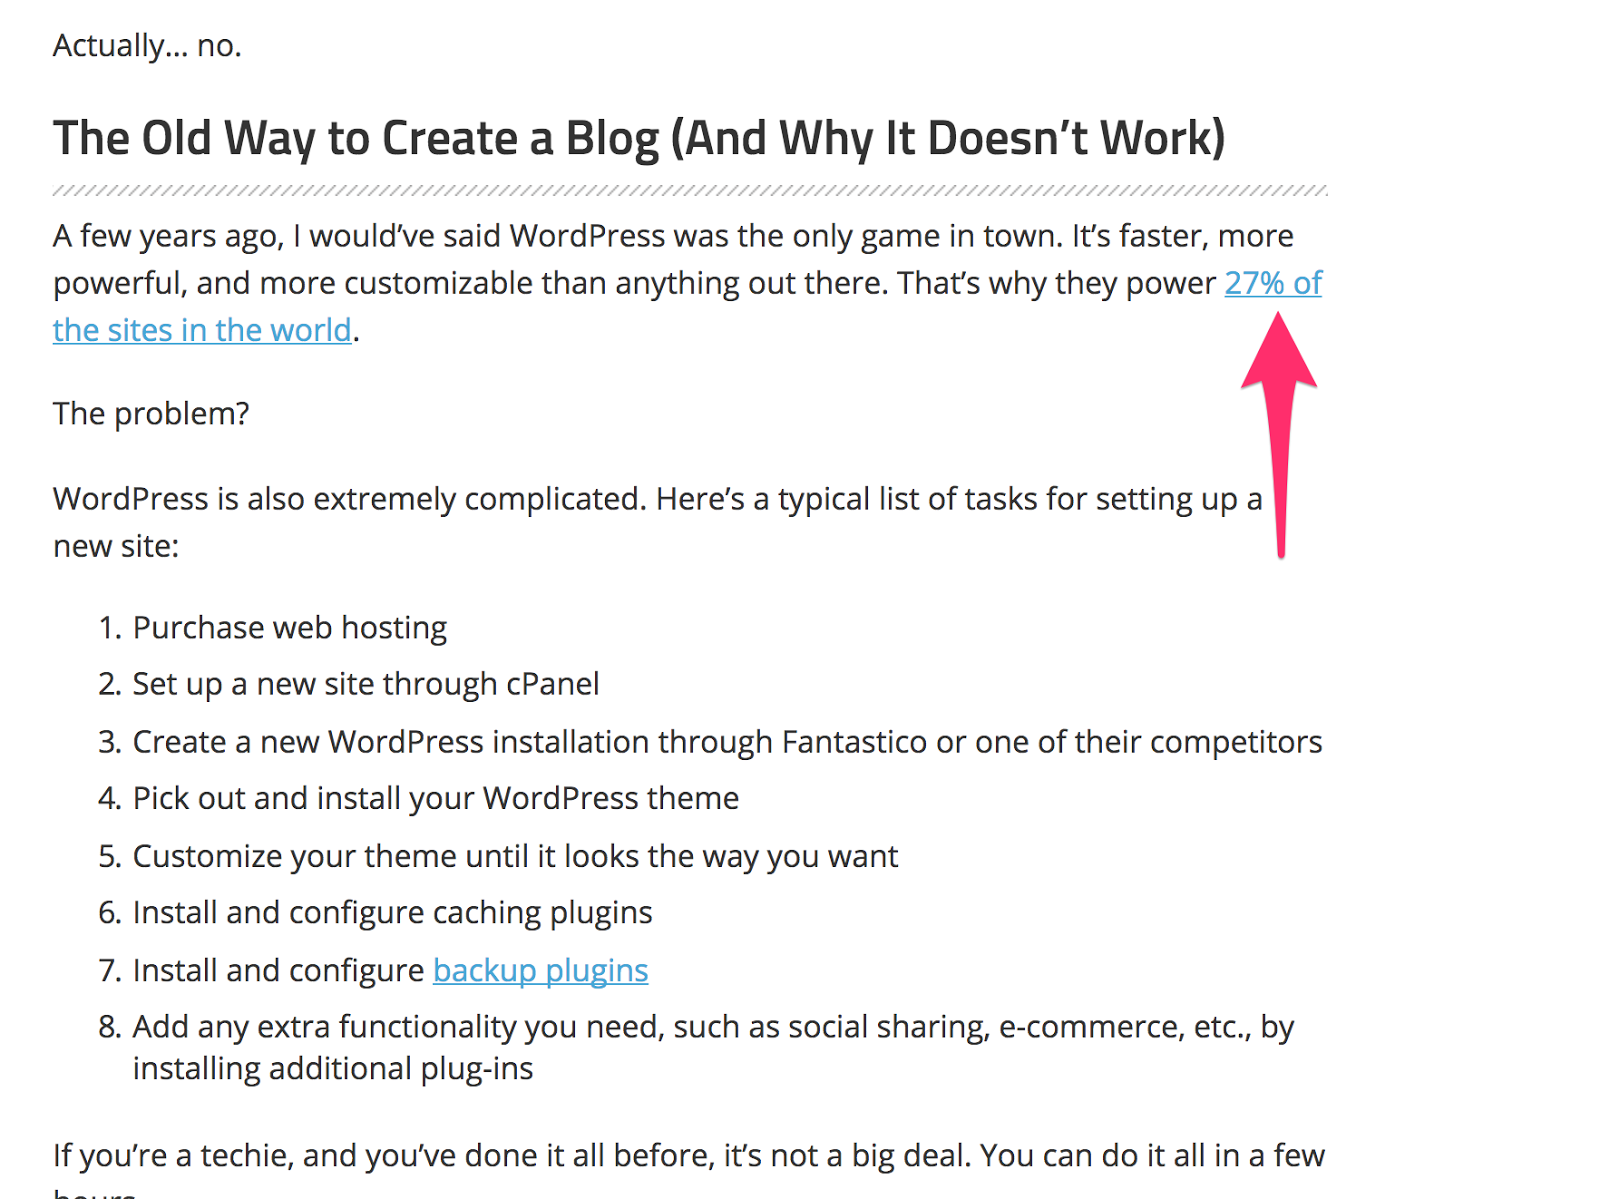 How to Start a Blog in 2018 New Method That s 20X Faster Smart Blogger